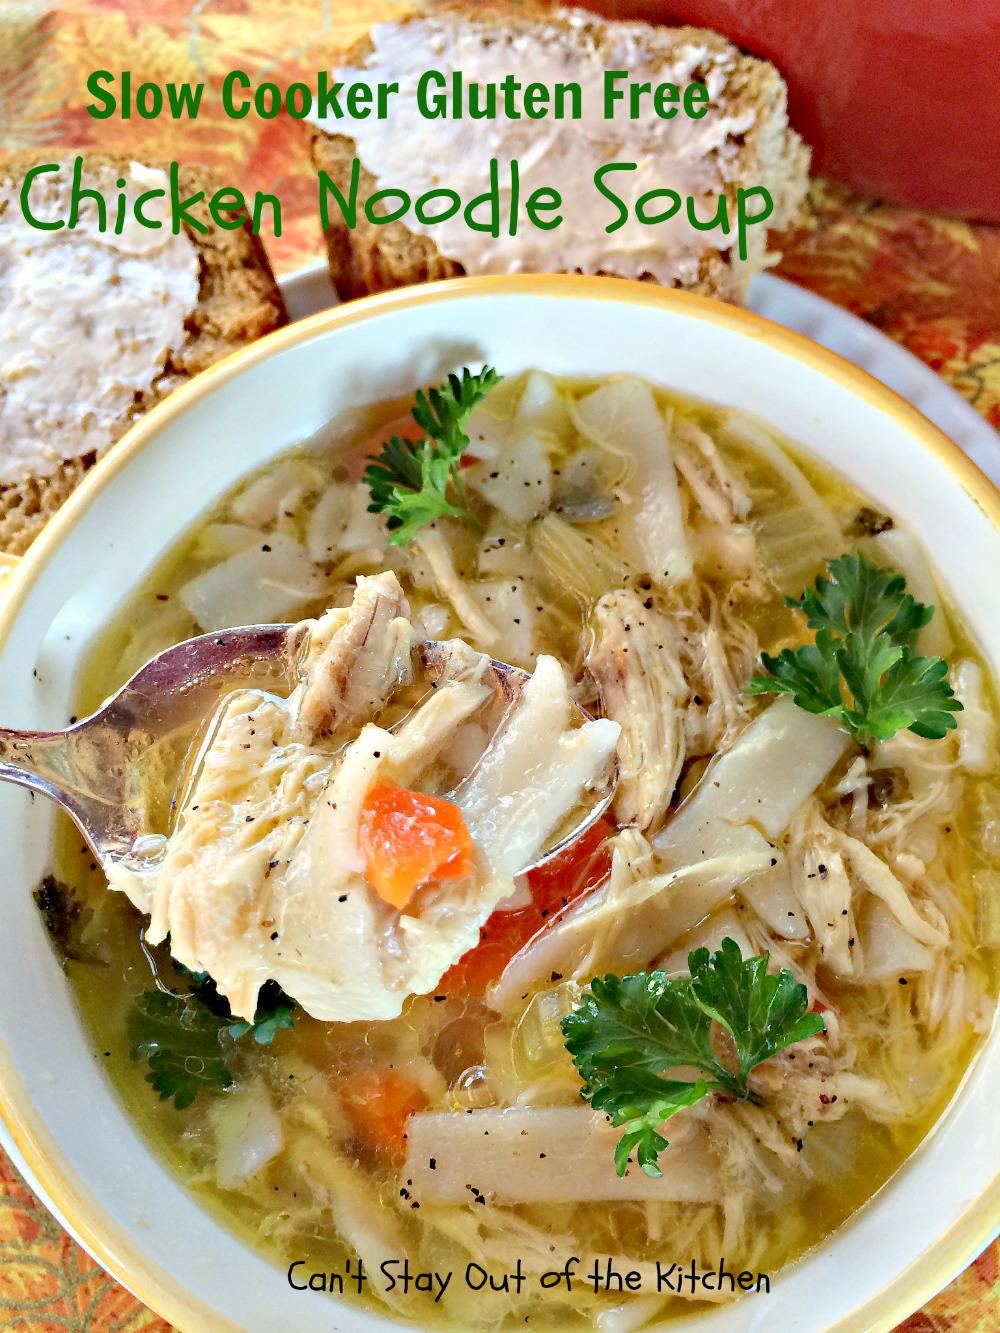 Slow Cooker Gluten Free Chicken Noodle Soup - Can't Stay Out of the Kitchen